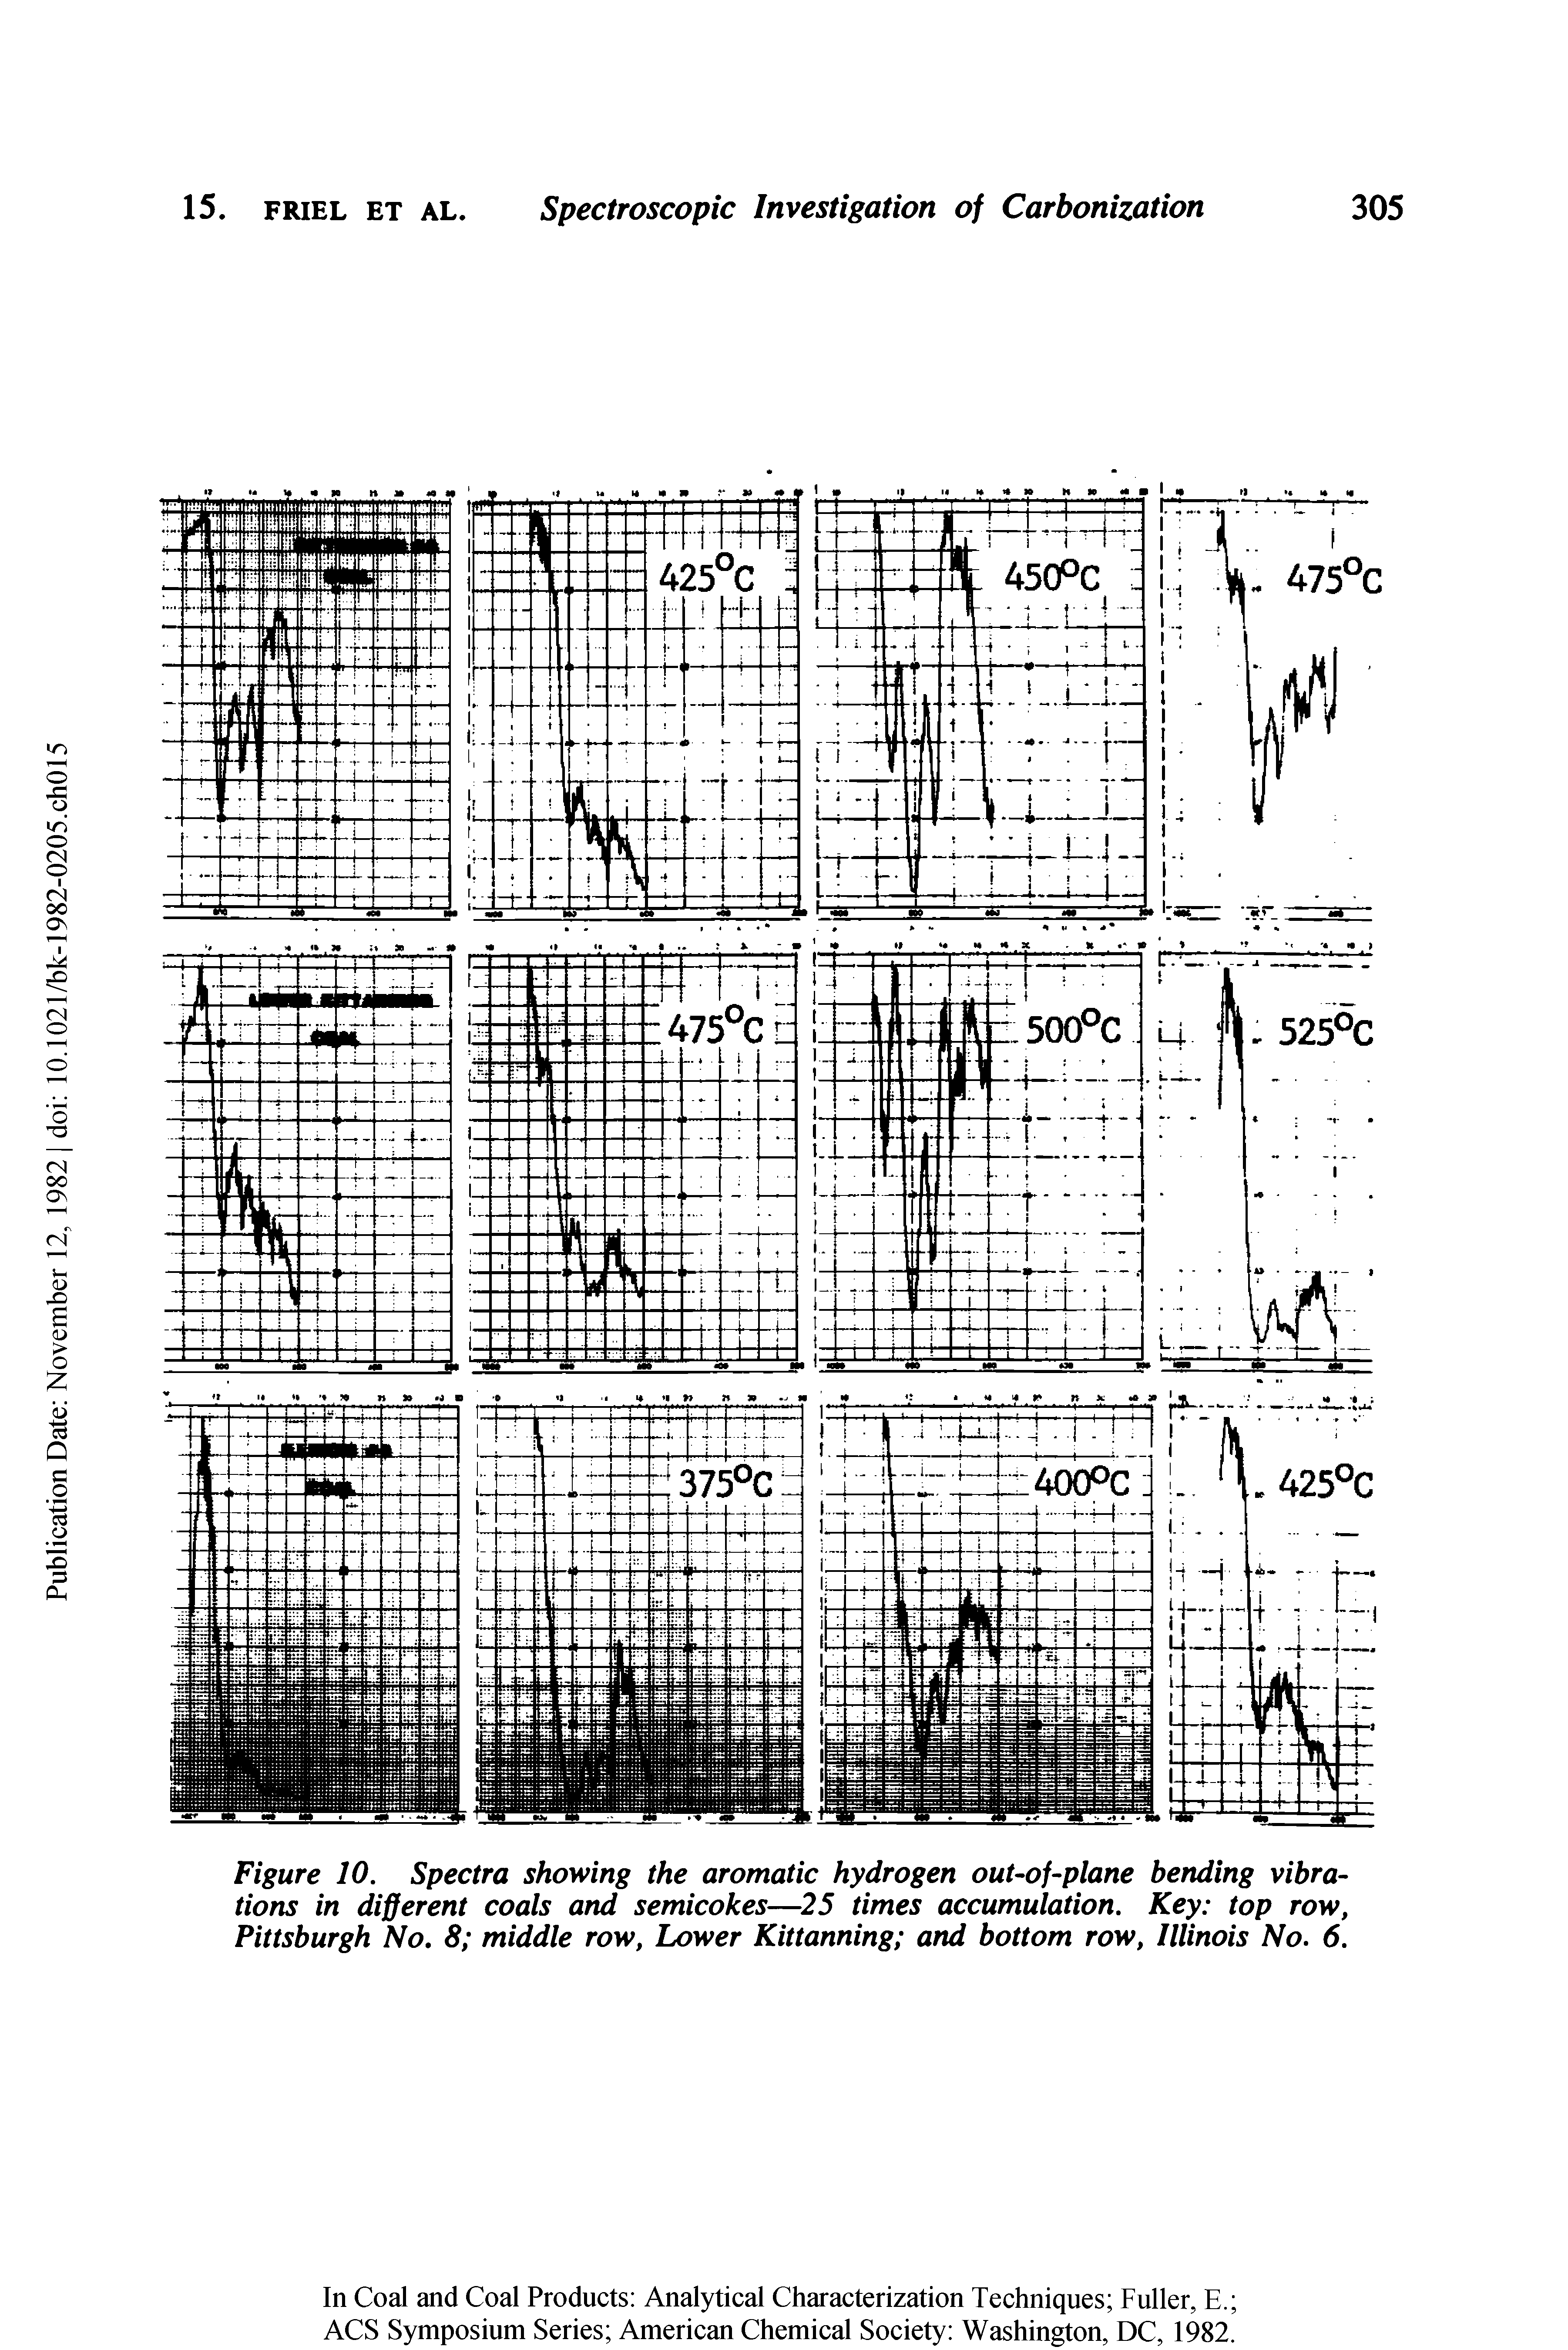 Figure 10. Spectra showing the aromatic hydrogen out-of-plane bending vibrations in different coals and semicokes—25 times accumulation. Key top row, Pittsburgh No, 8 middle row, Lower Kittanning and bottom row, Illinois No. 6.